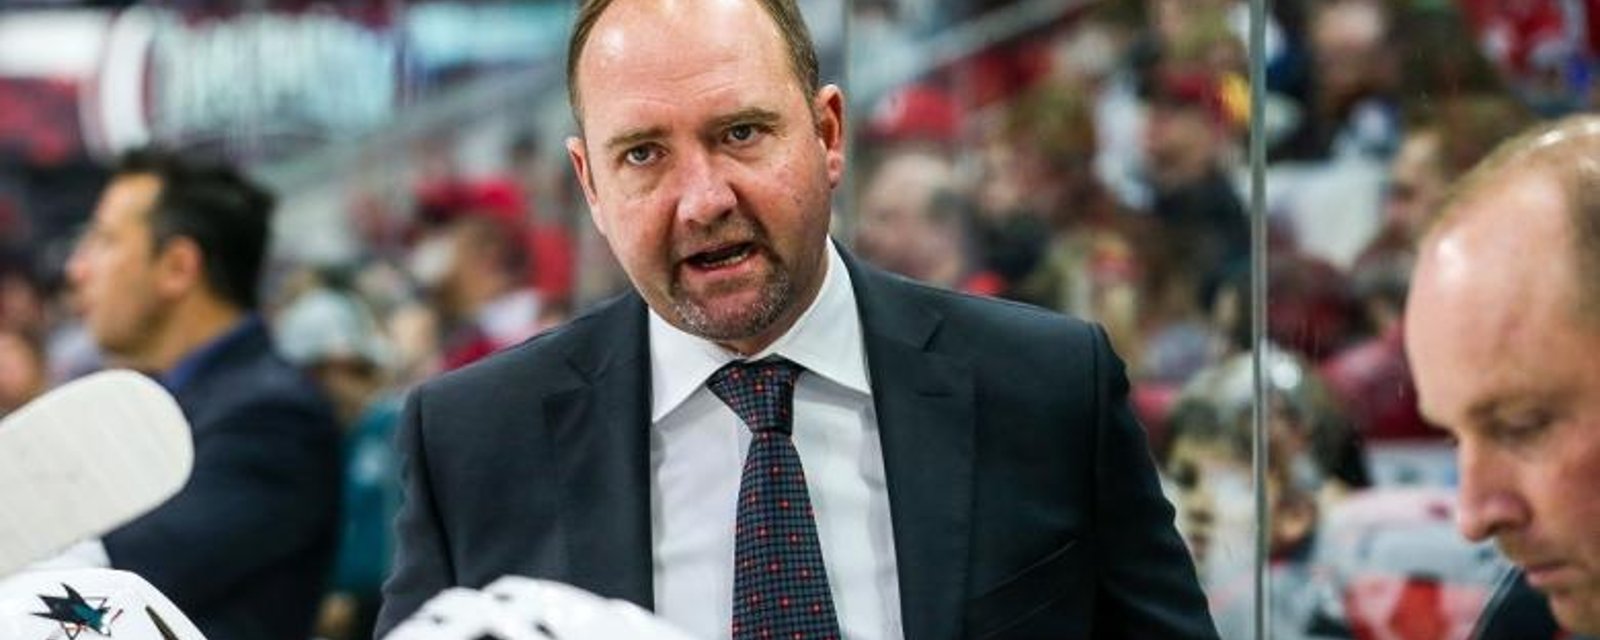 Sharks head coach appears to indicate he thinks Penguins are flopping.